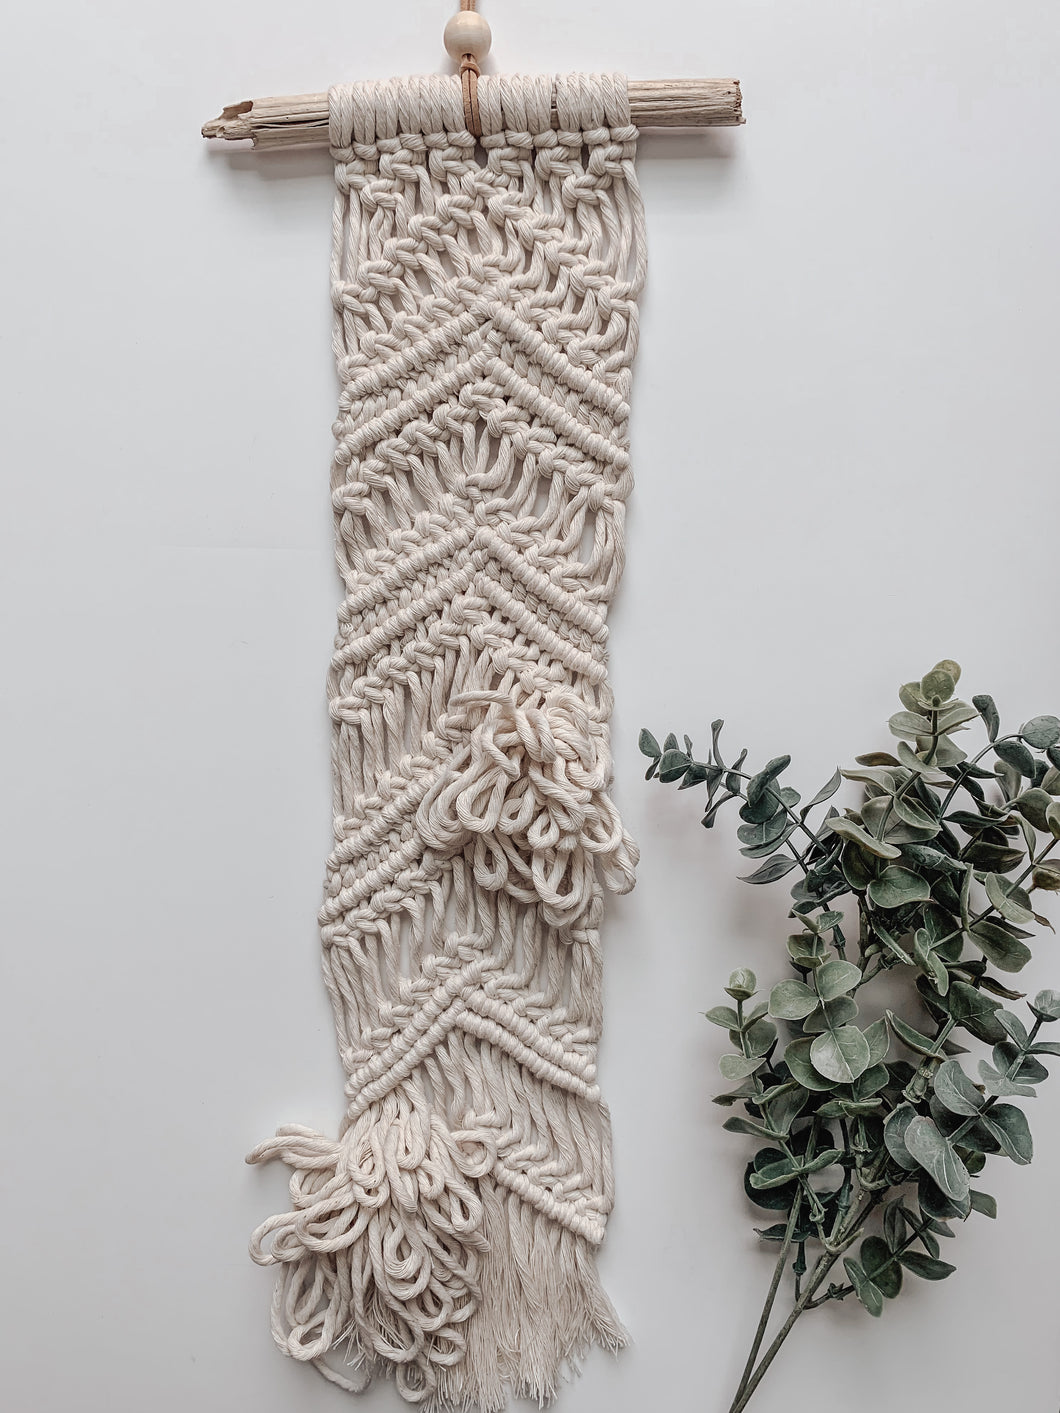 A natural white vertical macrame wall hanging with cotton cord hand knotted on driftwood